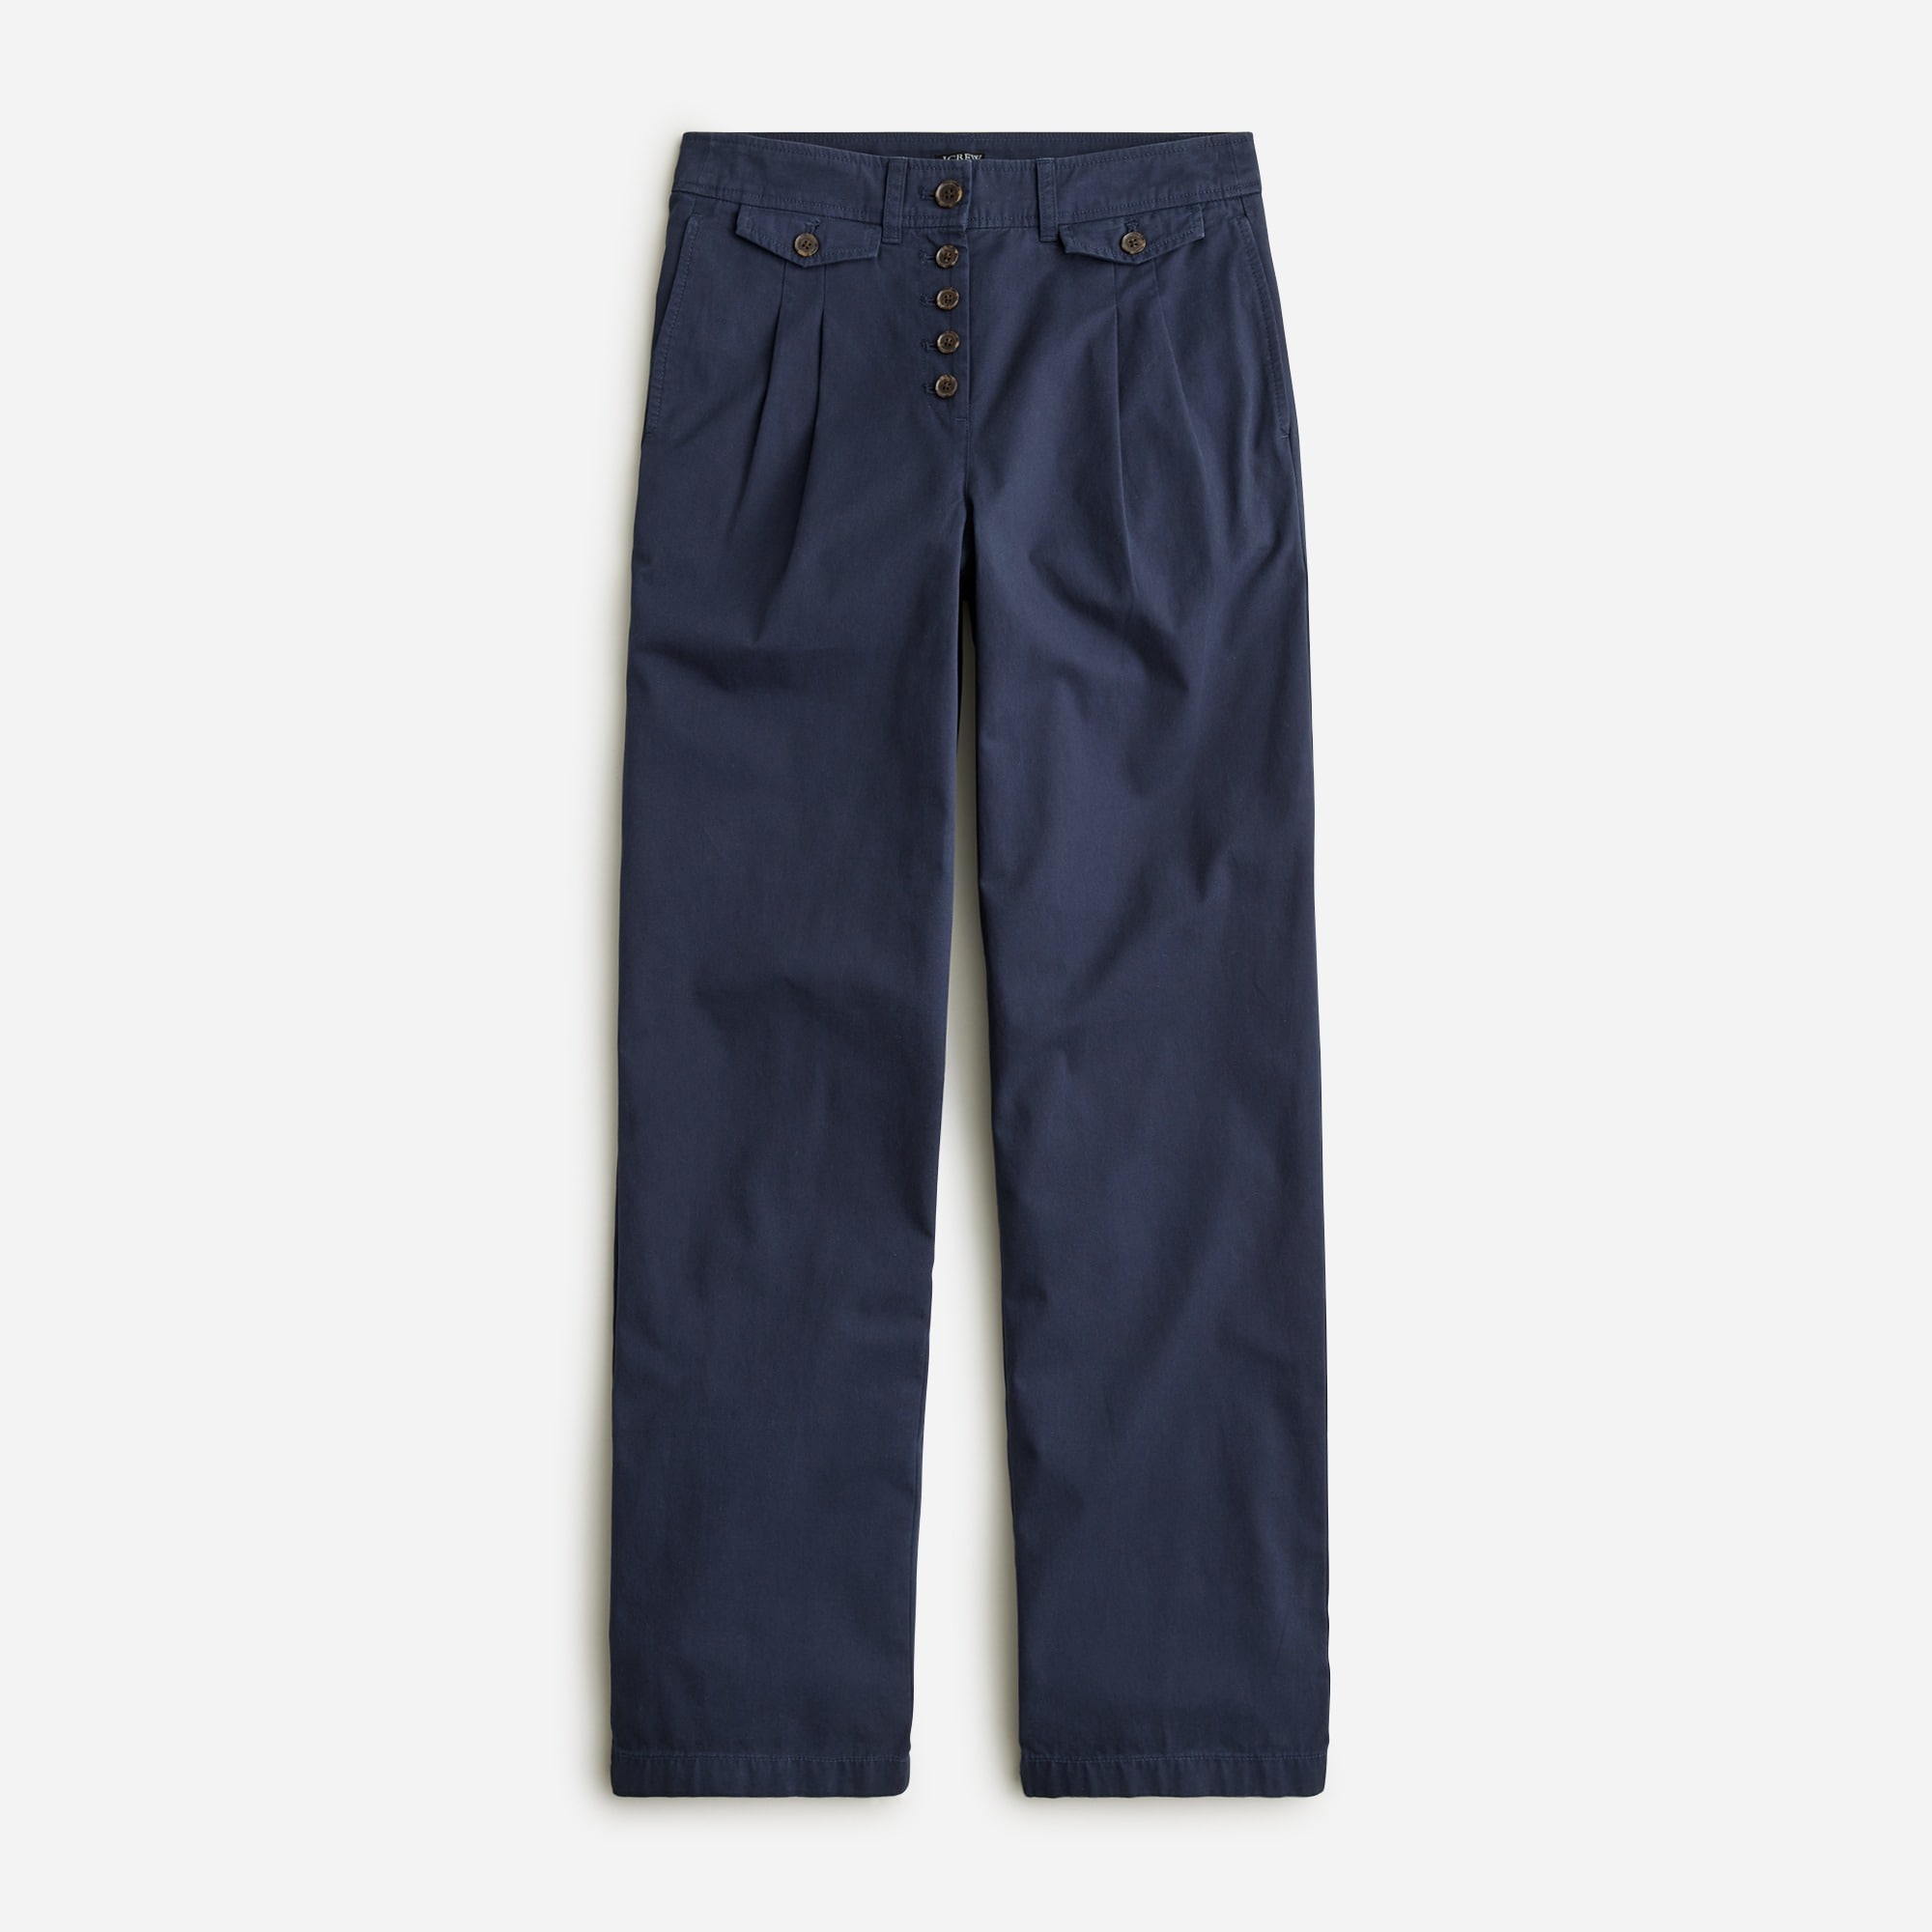  Pleated button-front pant in chino